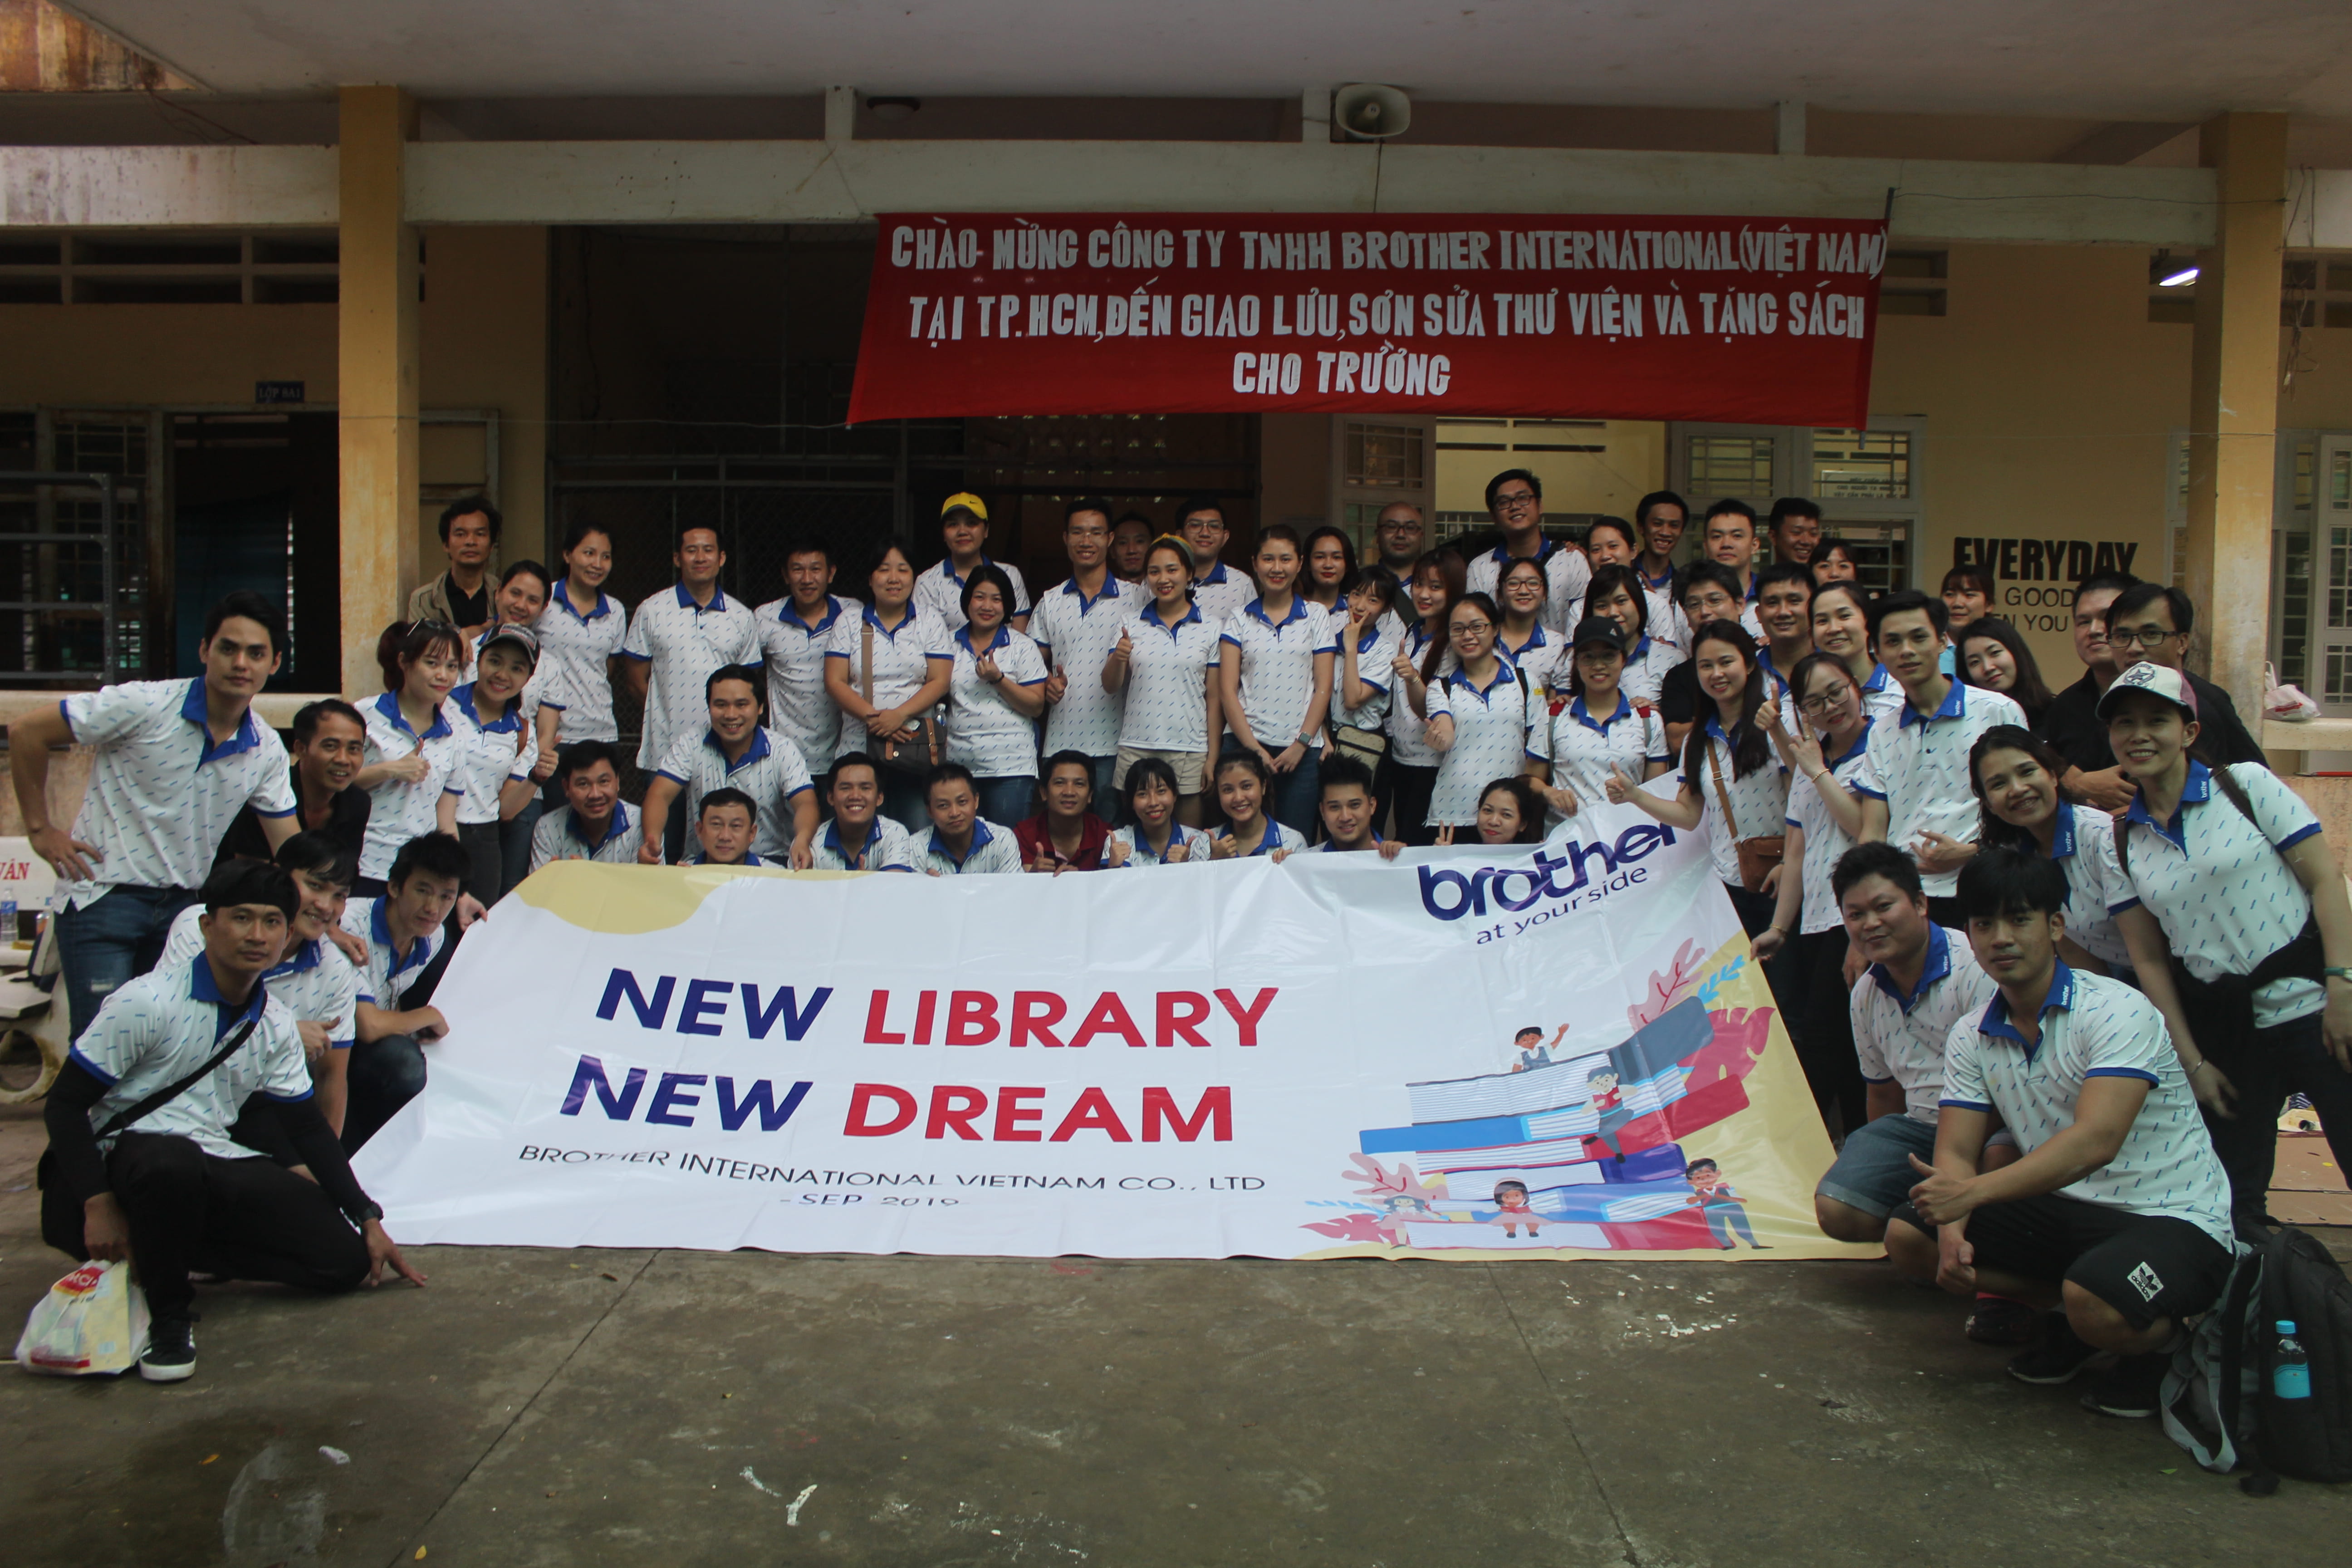 New Library New Dream